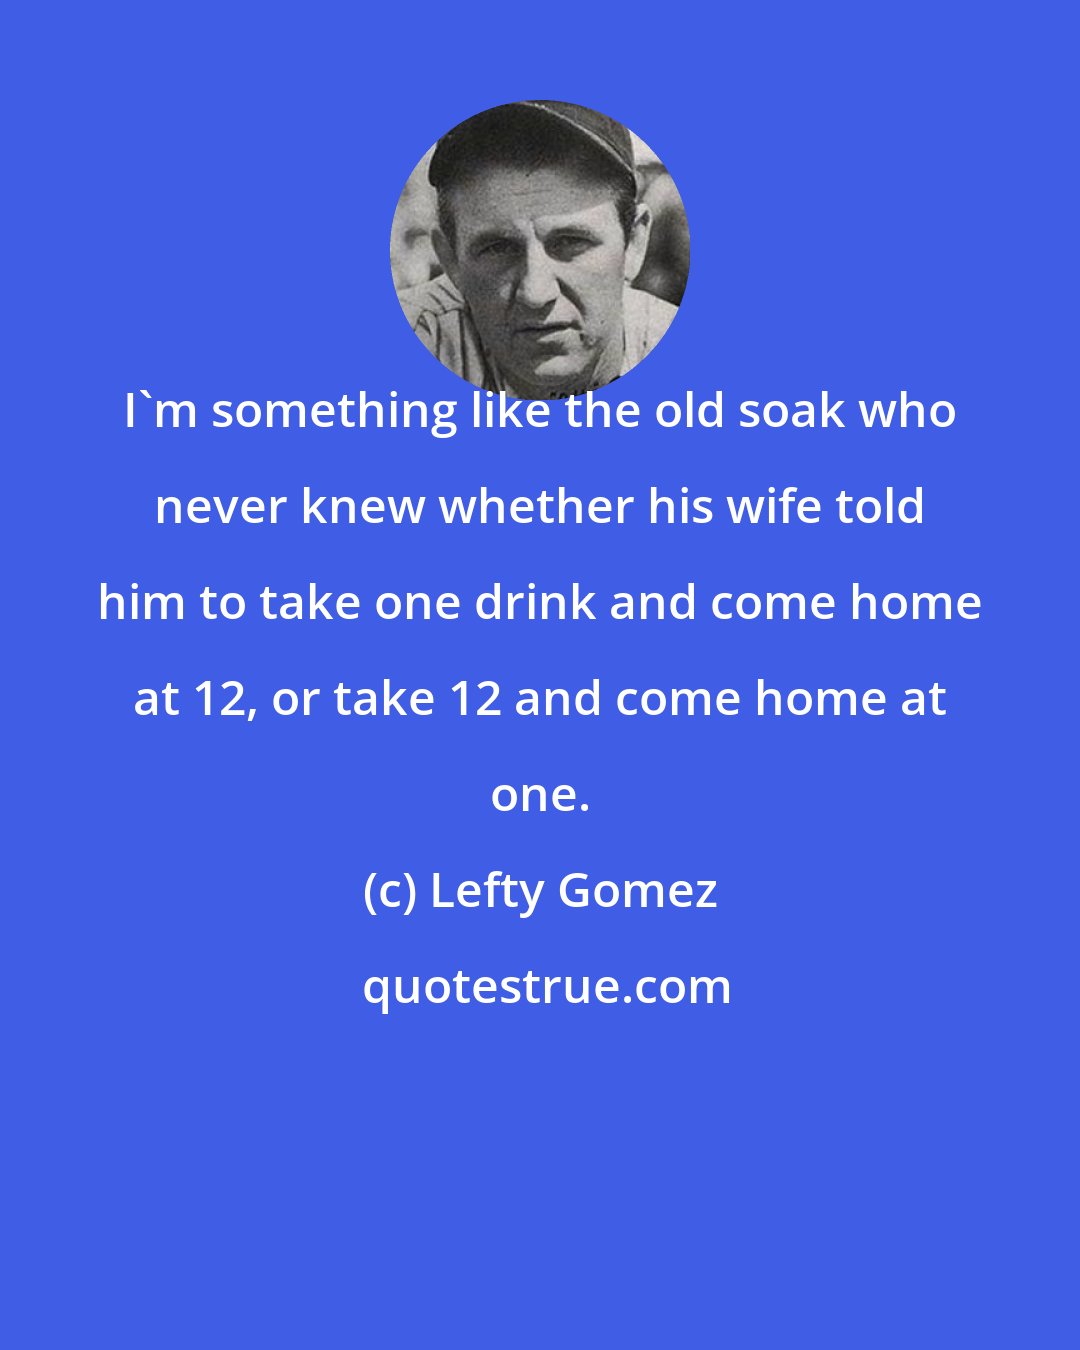 Lefty Gomez: I'm something like the old soak who never knew whether his wife told him to take one drink and come home at 12, or take 12 and come home at one.